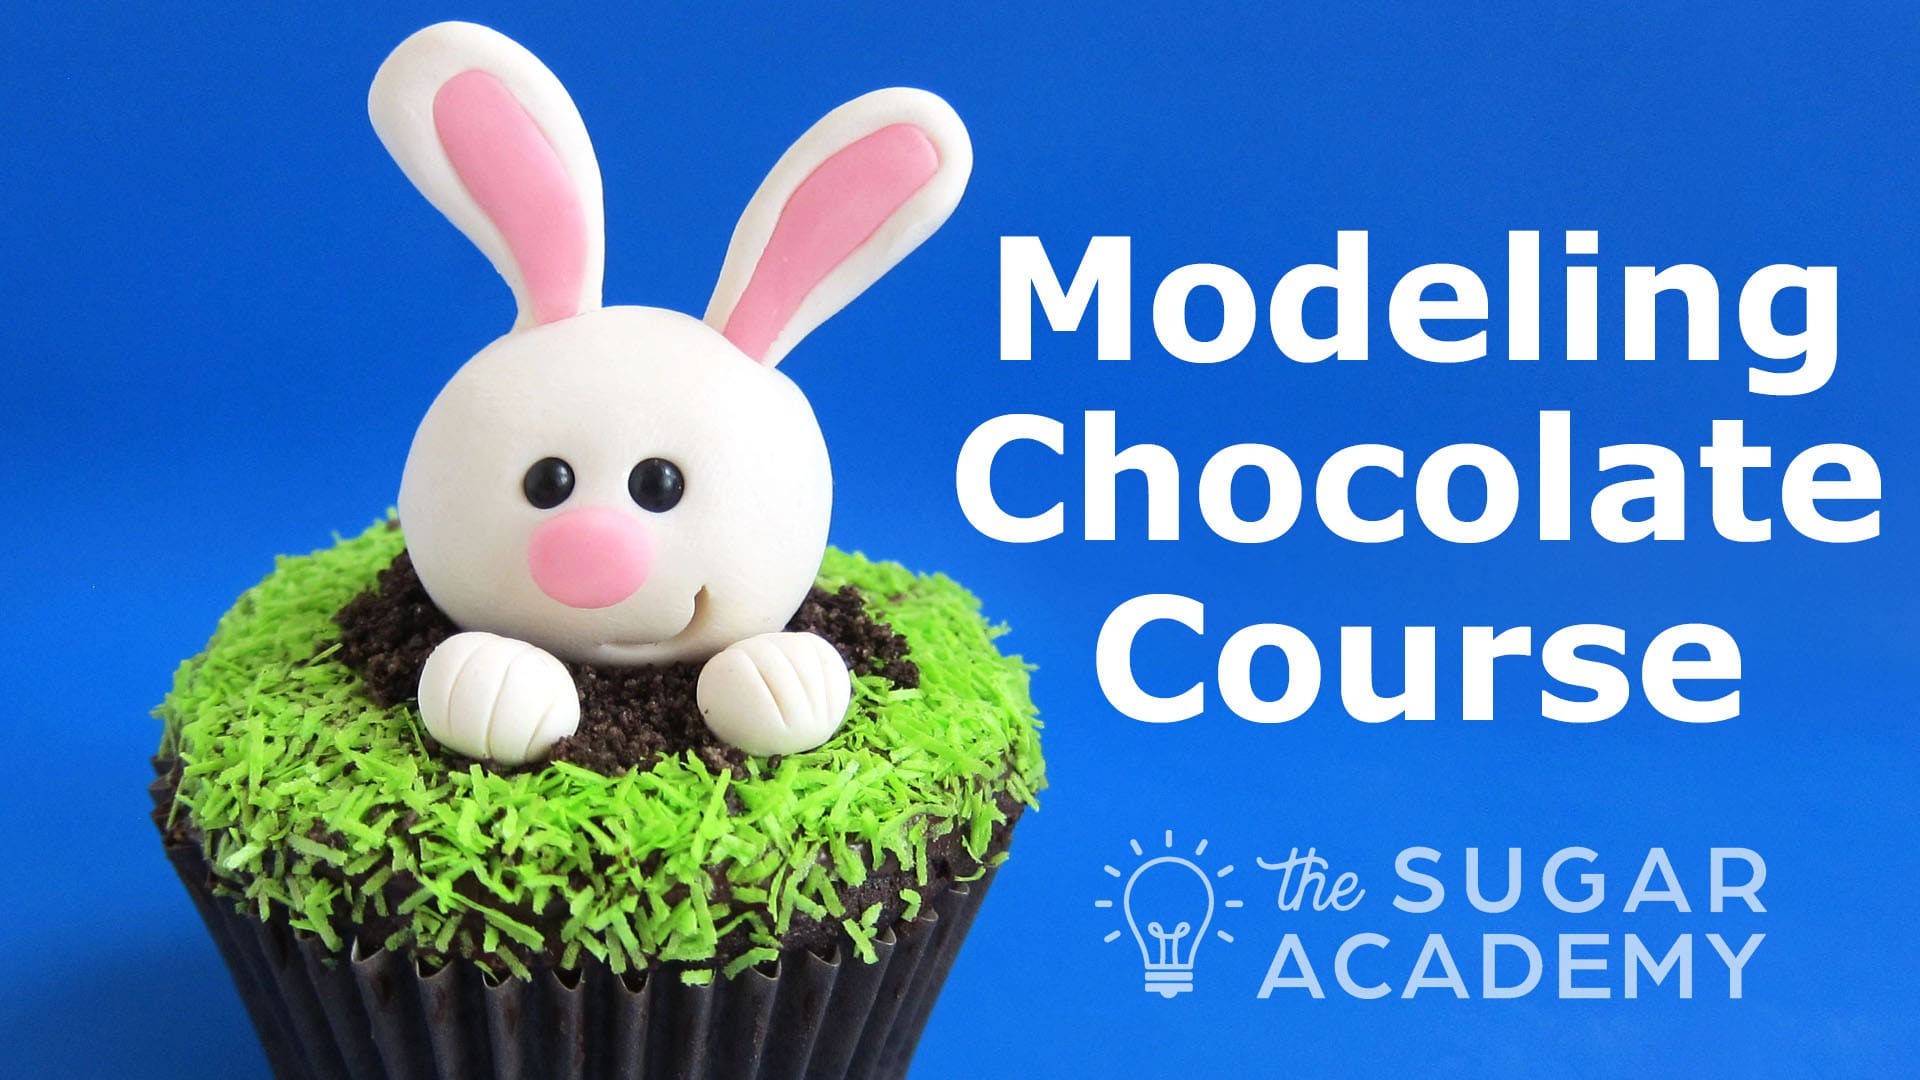 Modeling Chocolate Course Image